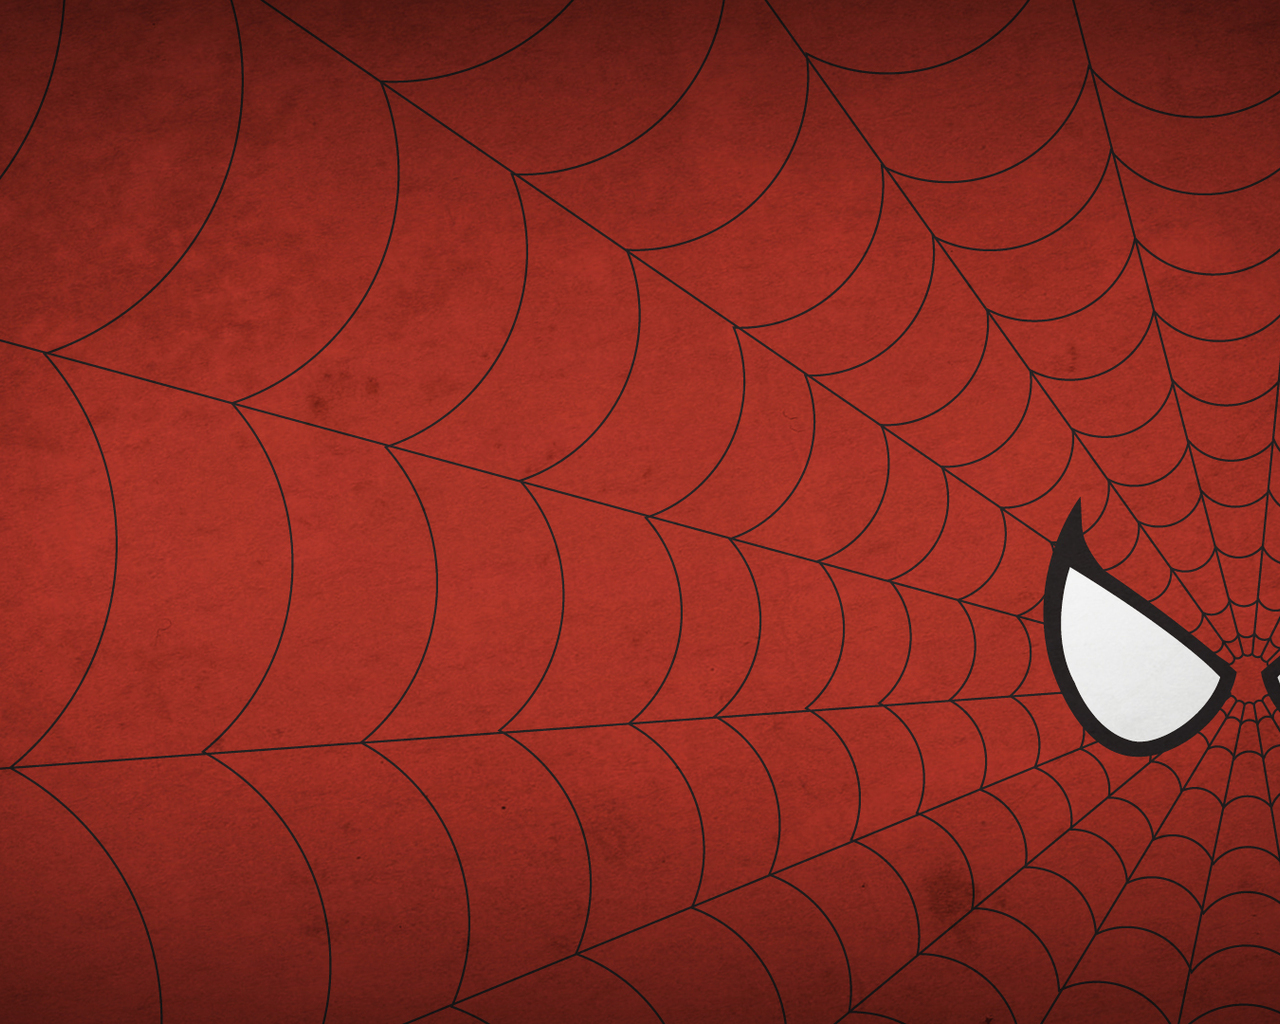 spider man, background, pictures, red 1080p